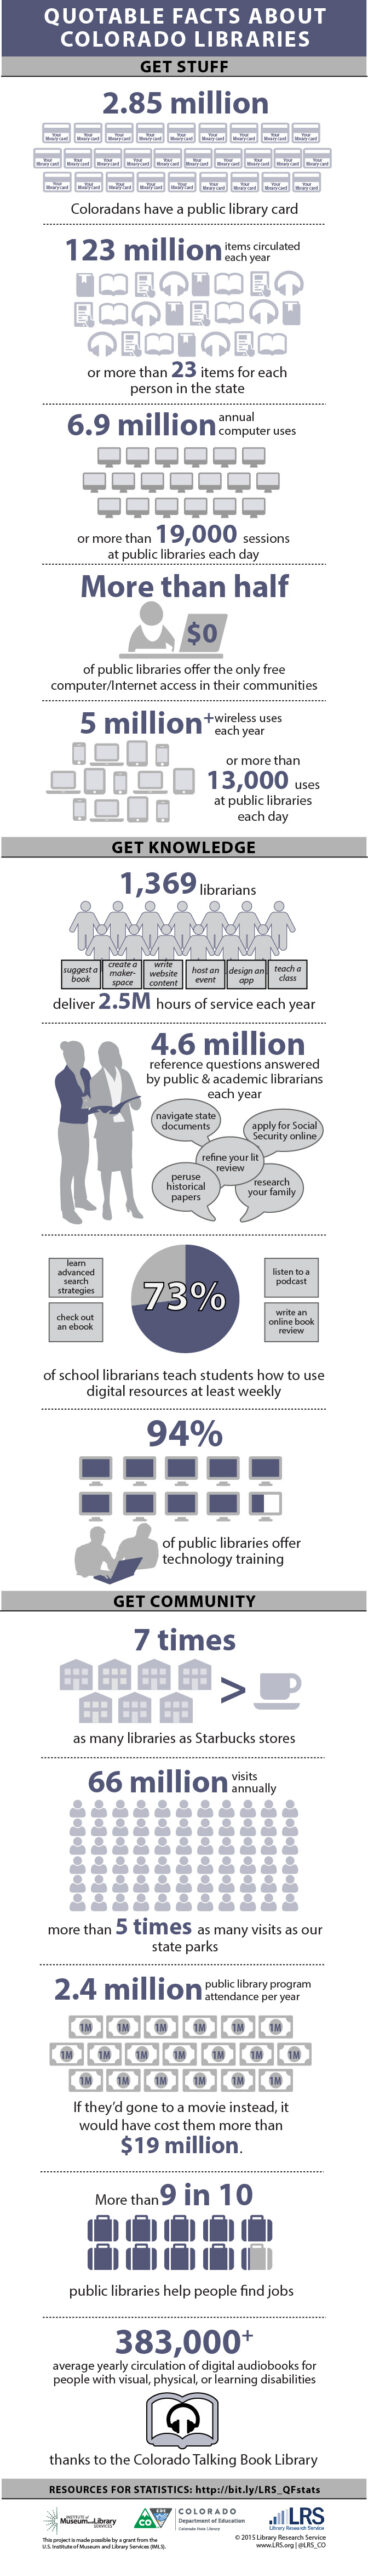 Detailed infographic with quotable facts for Colorado libraries in 2013.